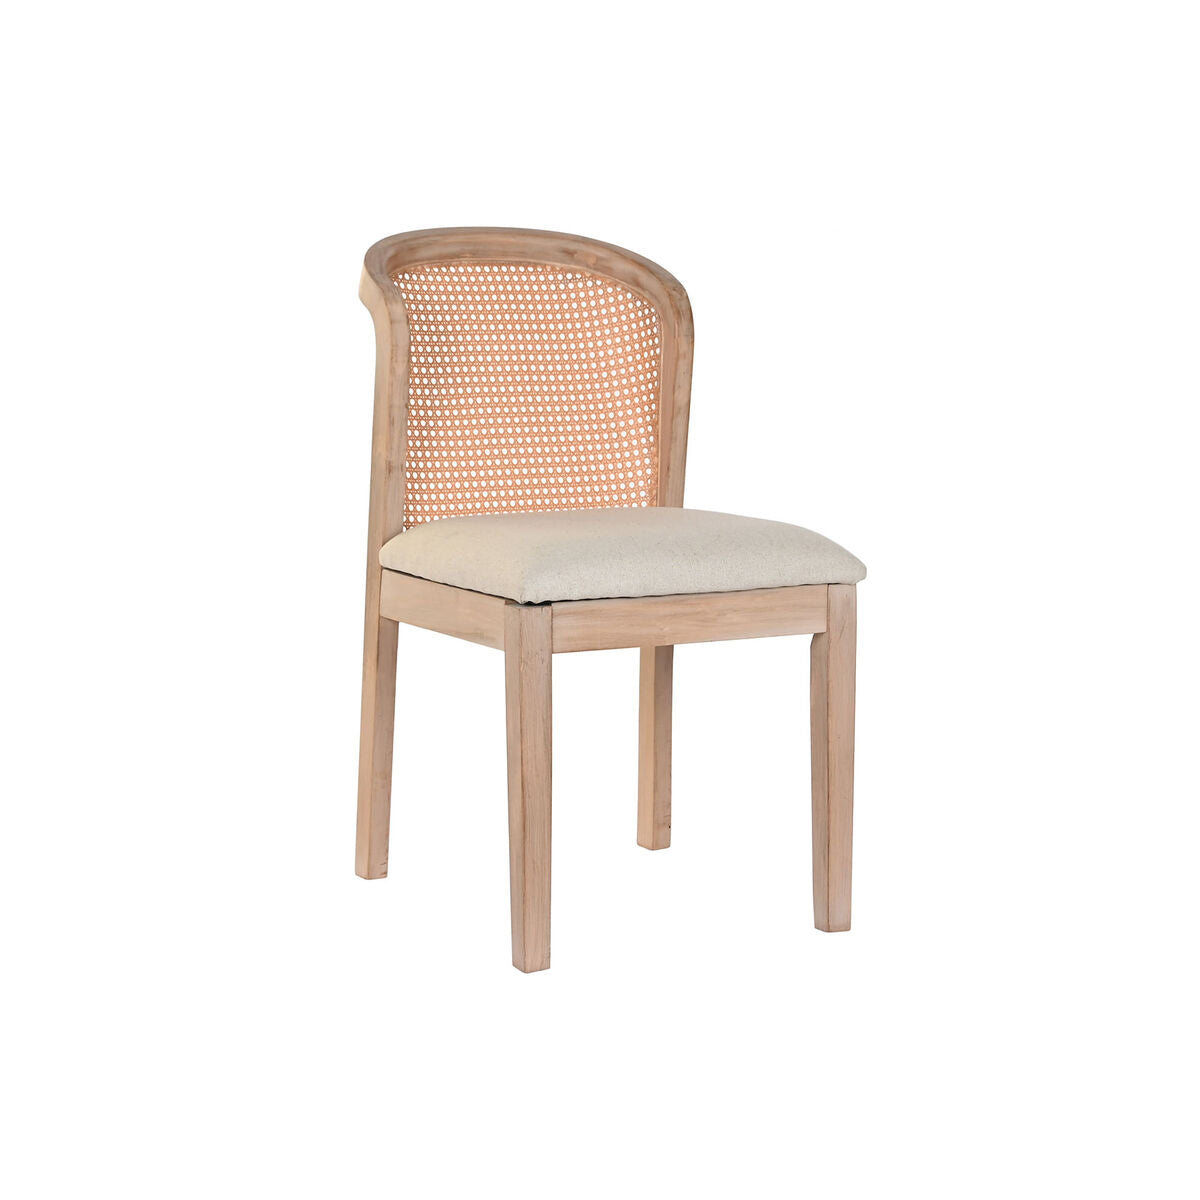 Beige Dining Chair in Wood and Rattan (46 x 61 x 86 cm)